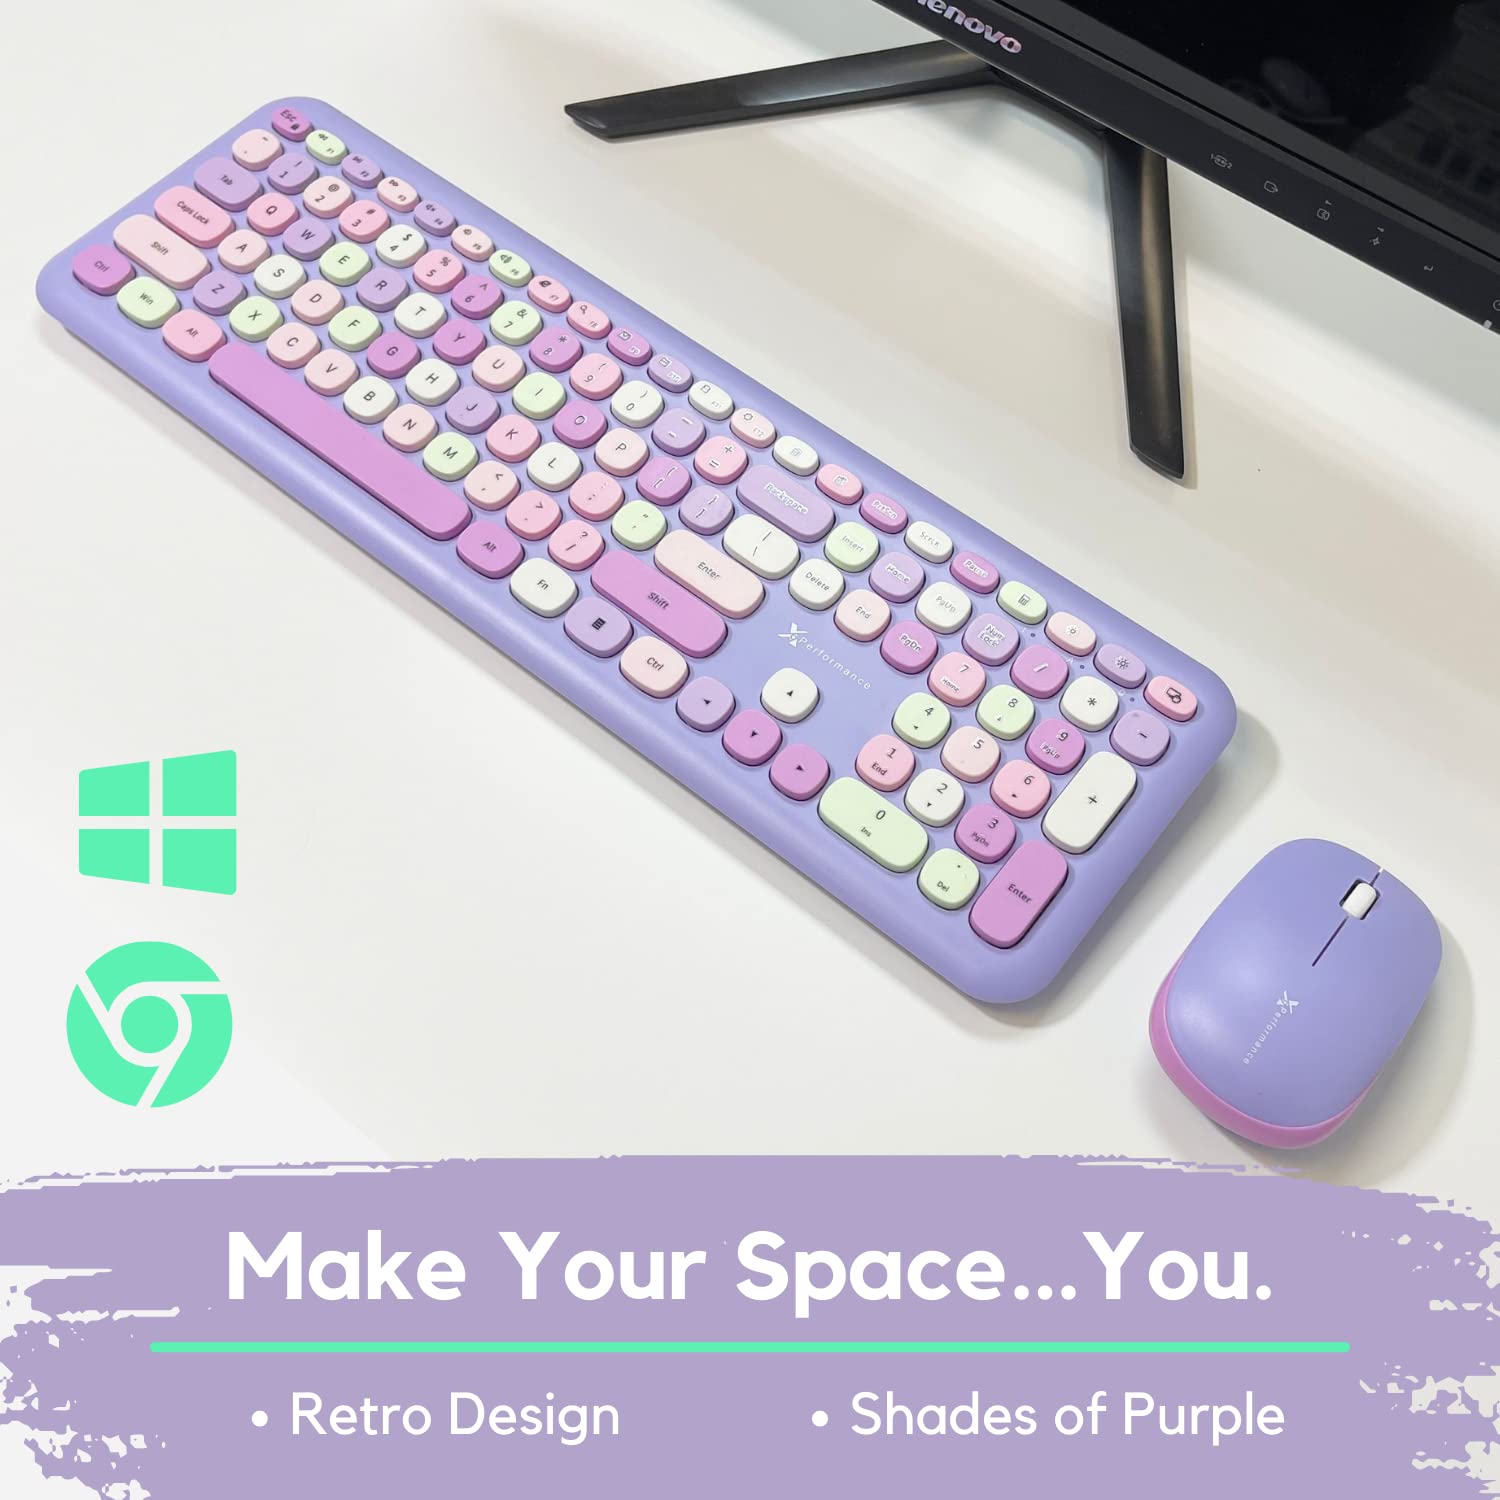 X9 Performance Colorful Keyboard and Mouse Combo - Transform Your Space with 2.4G Cute Wireless Aesthetic Purple Keyboard and Mouse Retro for PC Computer and Laptop